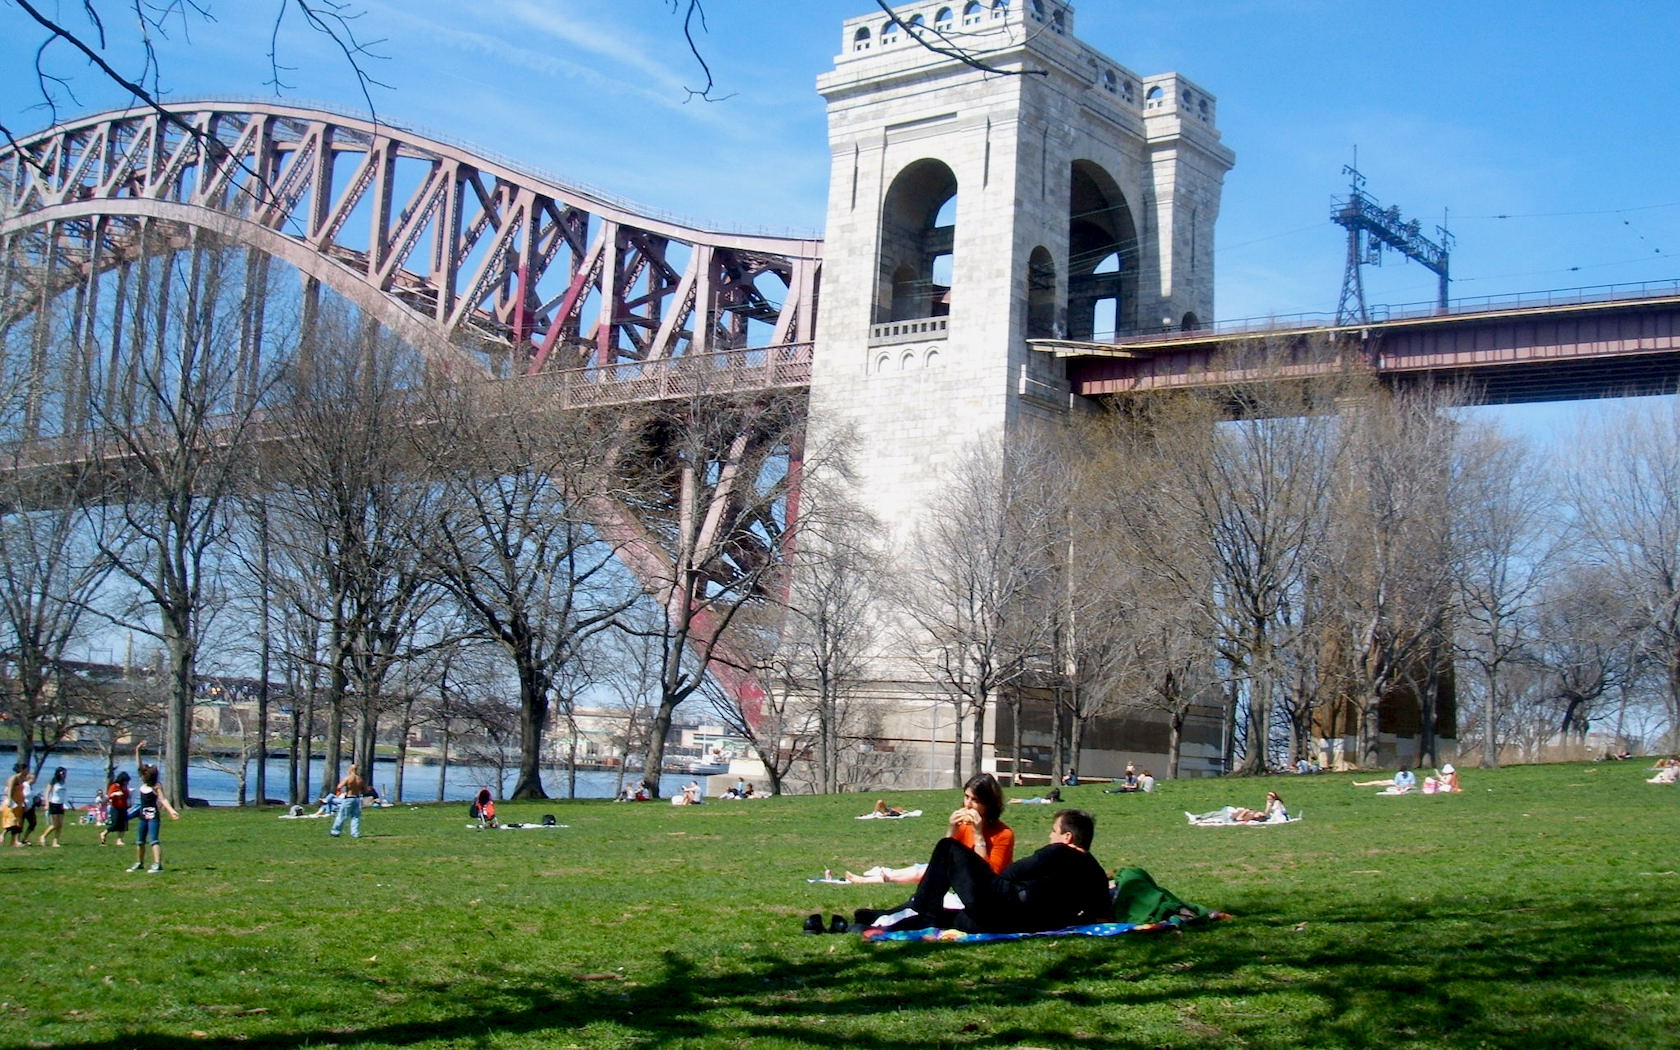 People relax with a picnic near suspension bridge in Astoria, New York City.